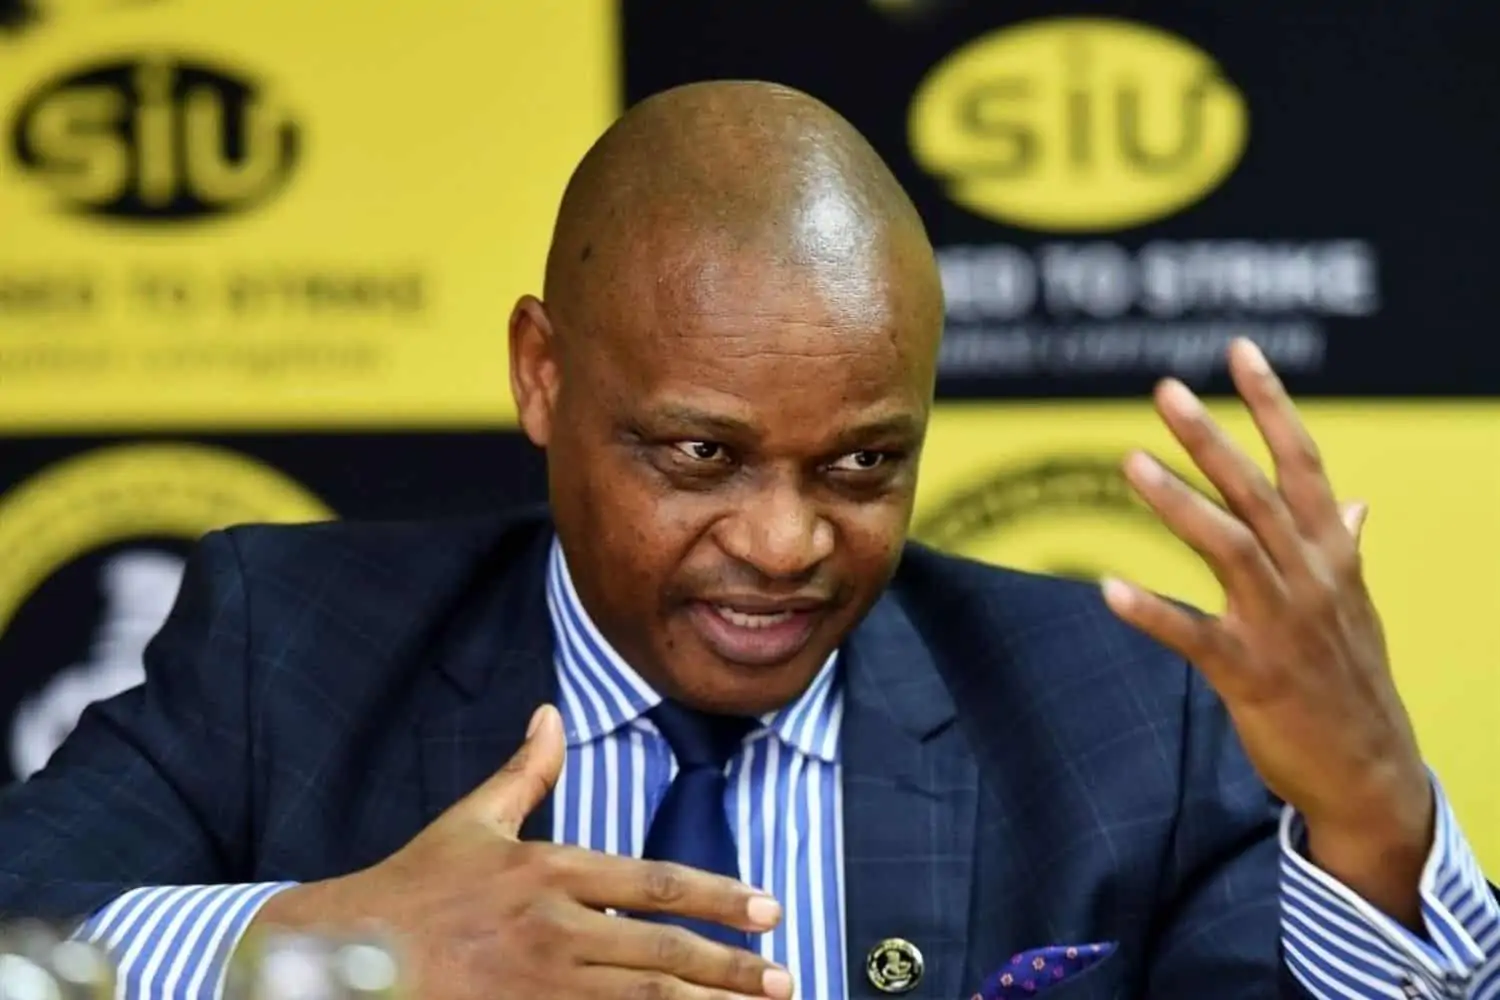 In the past financial year, the SIU has recovered ± R1.8 billion